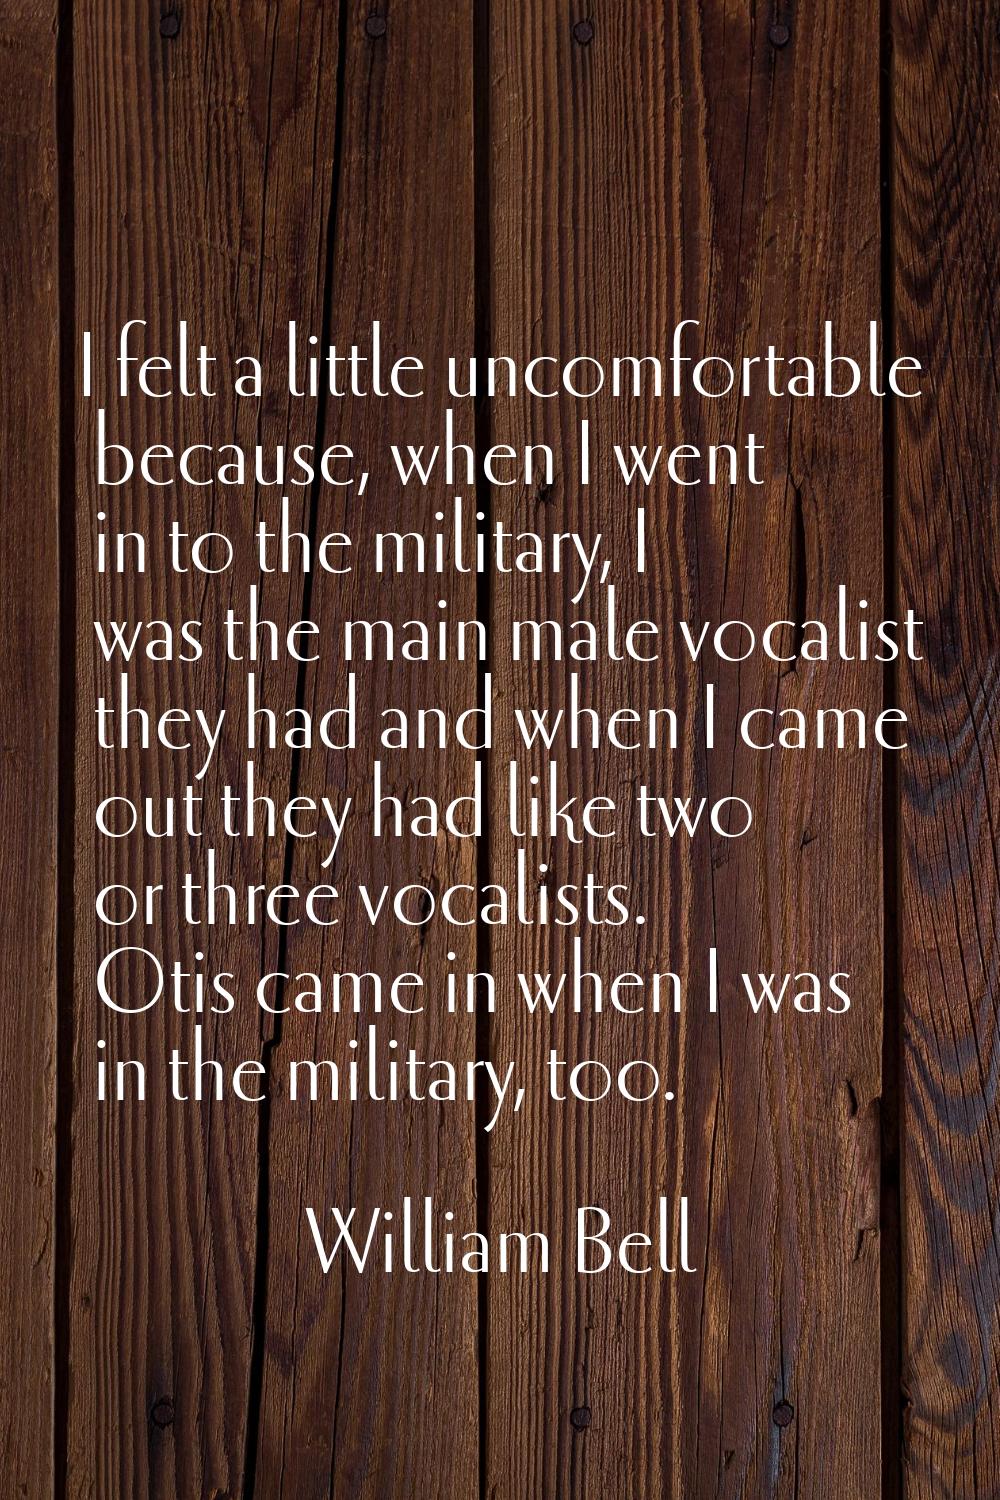 I felt a little uncomfortable because, when I went in to the military, I was the main male vocalist